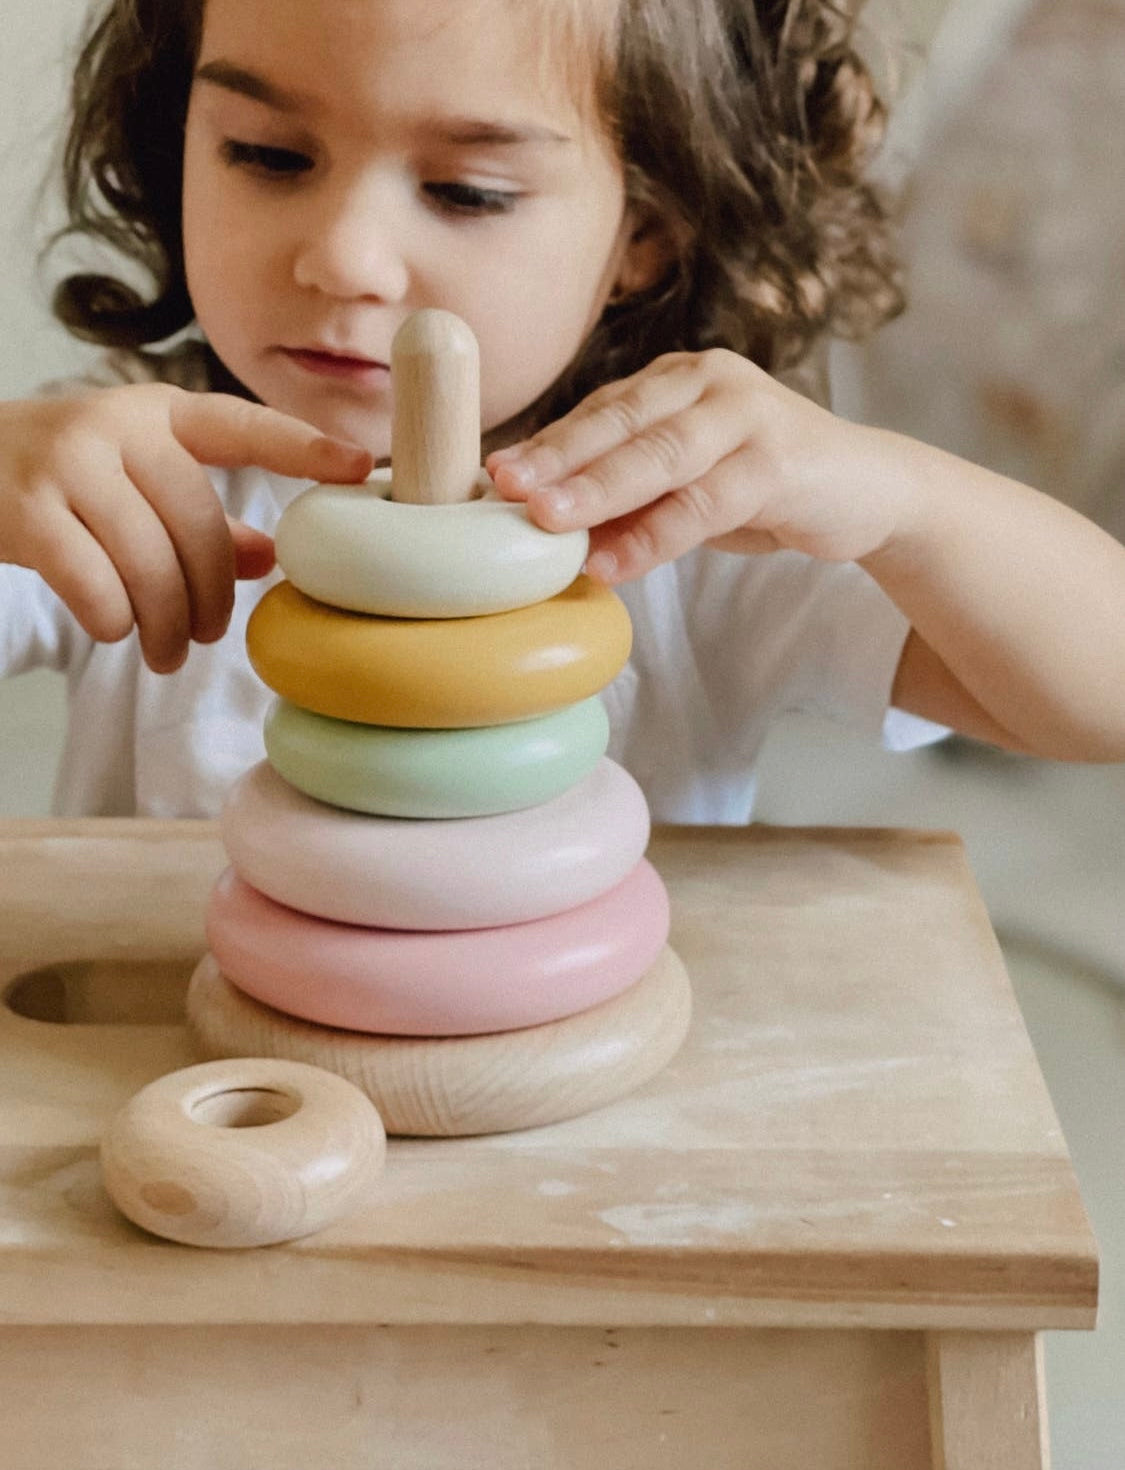 Soft Sherbet Wooden Stacking Toy